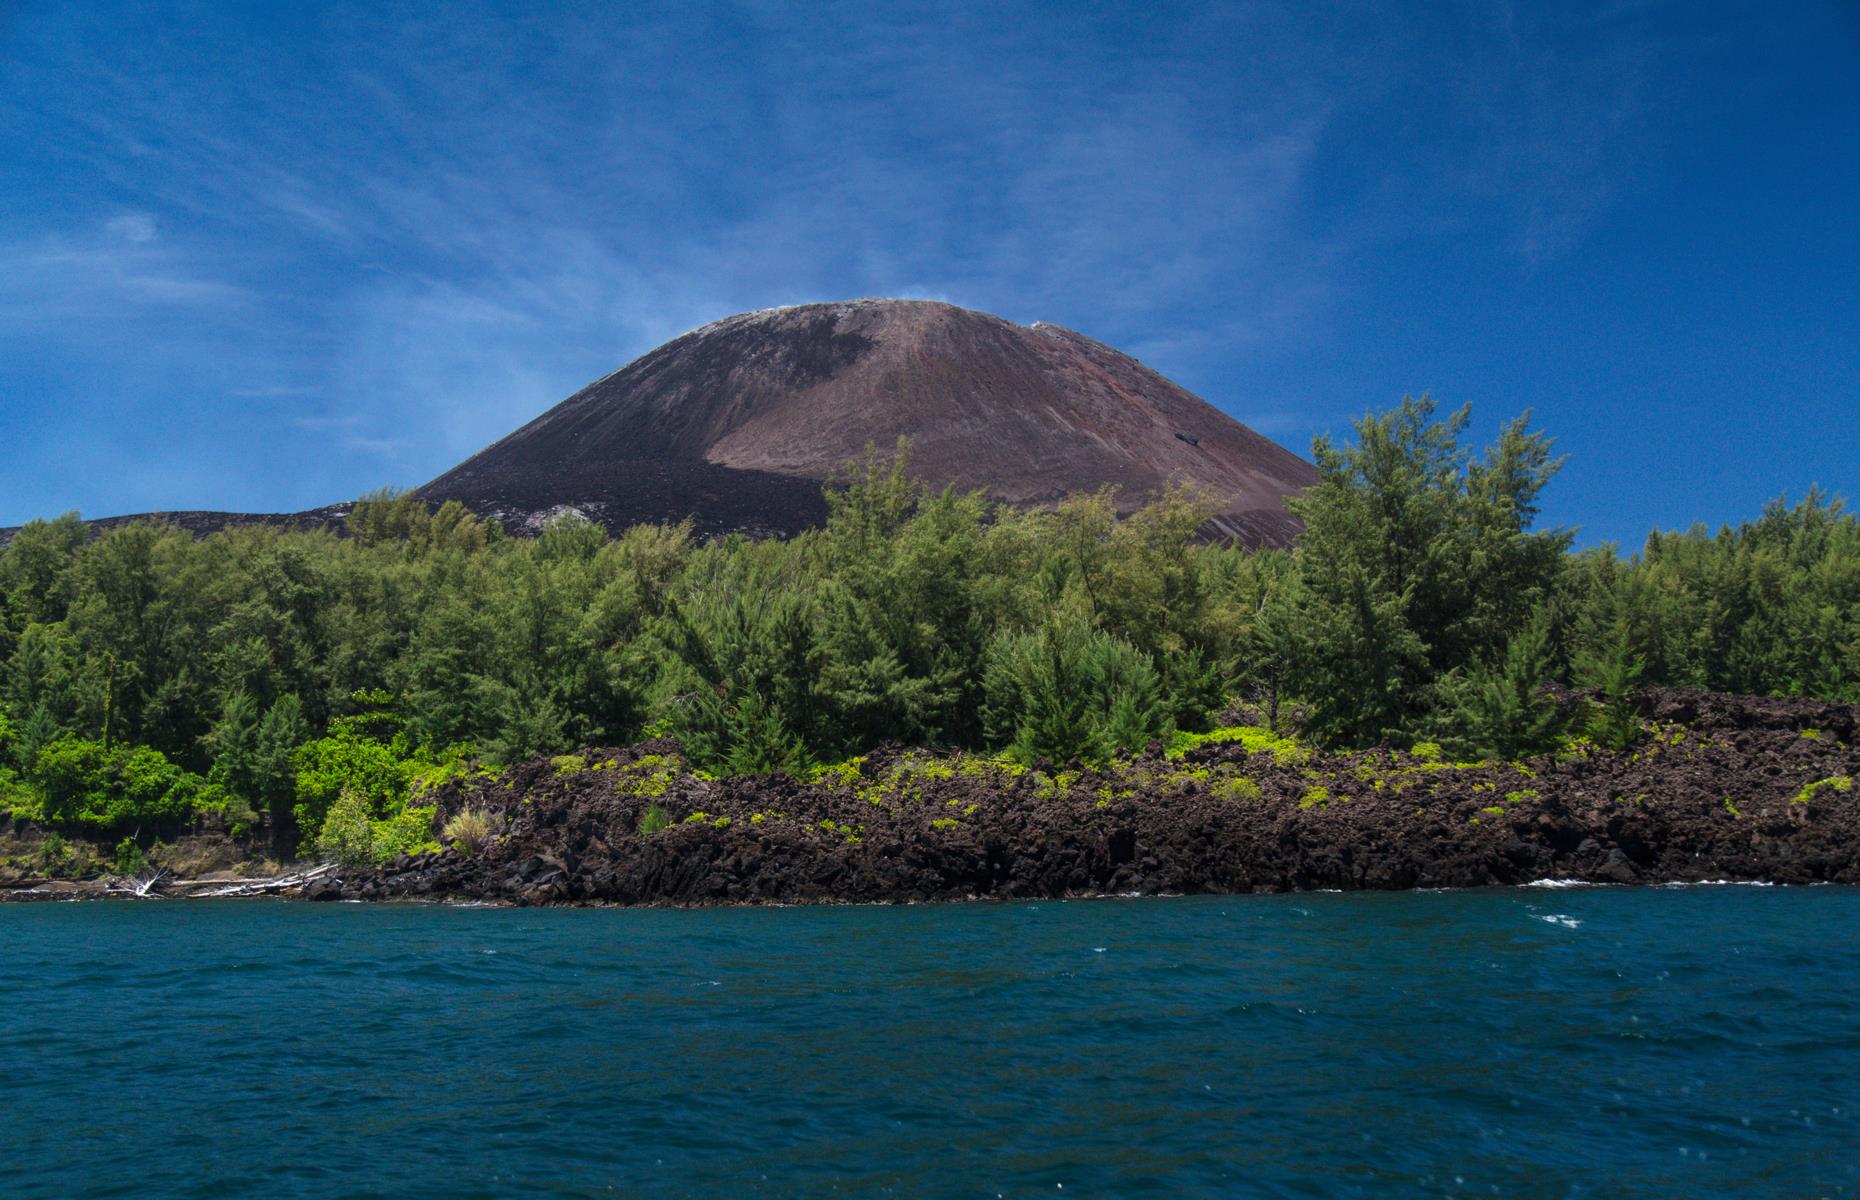 <p>Though the volcano was uninhabited, its collapse beneath the water triggered a series of tsunamis that killed around 36,000 people in nearby Java and Sumatra. It erupted from the seafloor in 1928, forming an island known as Anak Krakatau or ‘Child of Krakatoa’ (pictured), and sporadic activity since has seen the volcano grow once again to around 1,000 feet (330m) above sea level. The volcanic islands are part of Ujung Kulon National Park, and people can usually visit on tours.</p>  <p><a href="https://www.loveexploring.com/galleries/75464/the-most-dangerous-beaches-in-the-world?page=1"><strong>These are the most dangerous beaches in the world</strong></a></p>